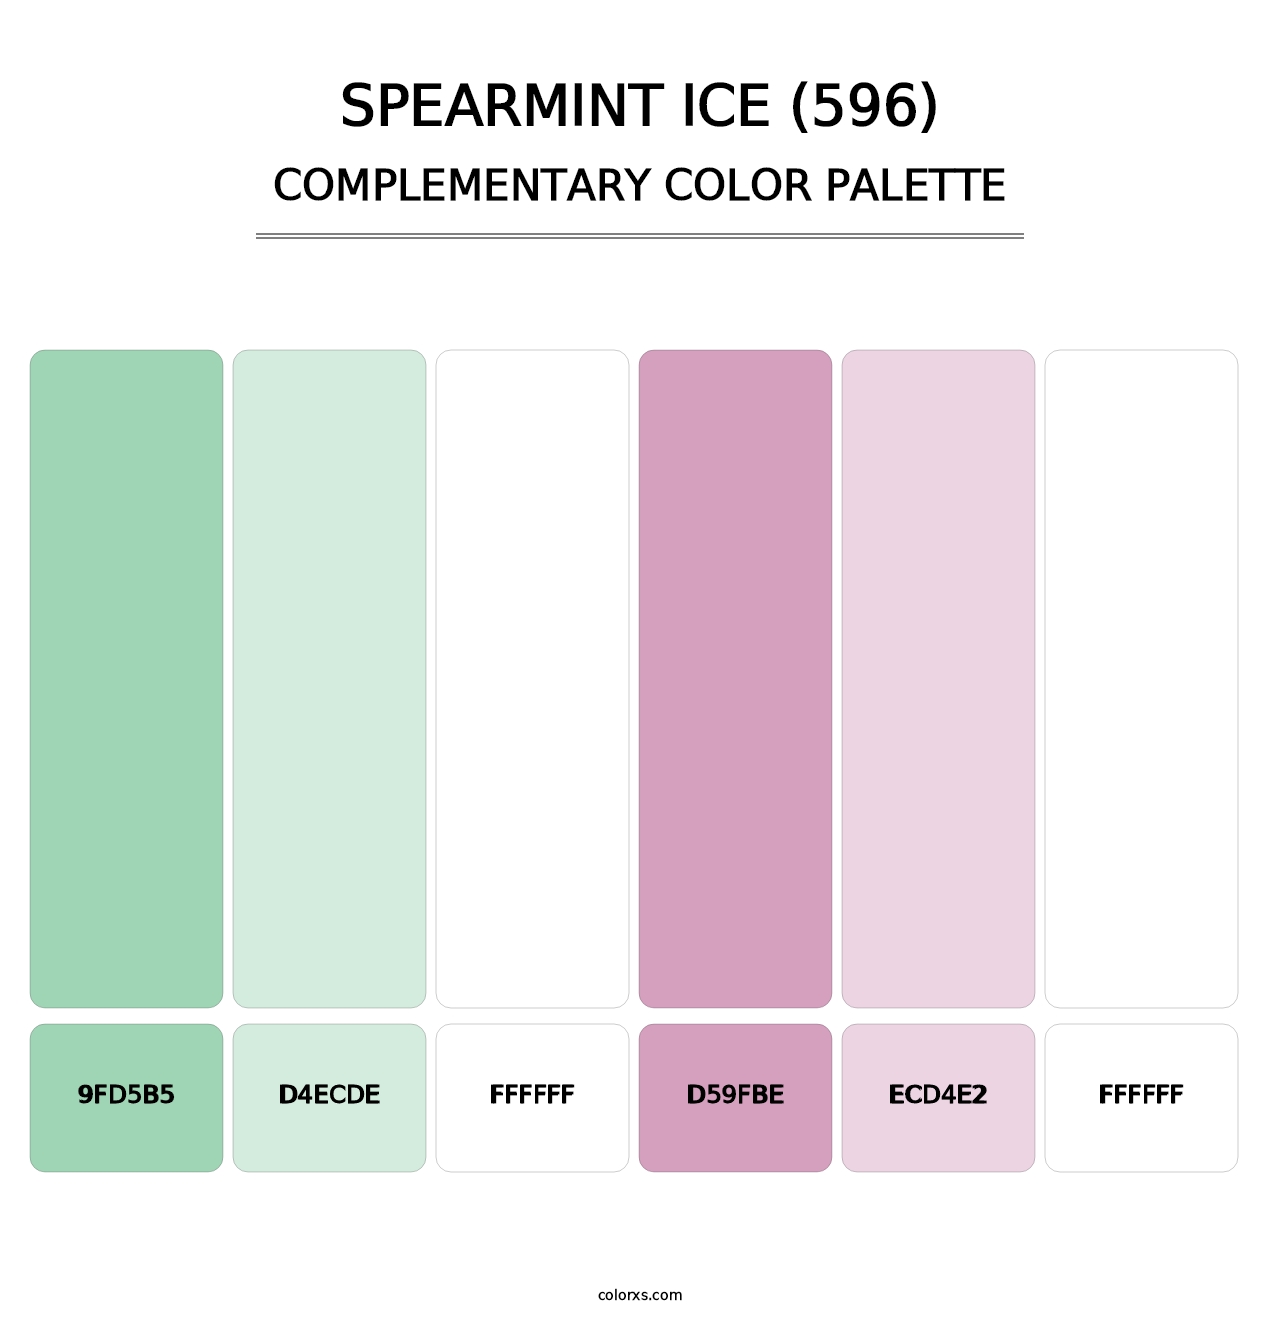 Spearmint Ice (596) - Complementary Color Palette